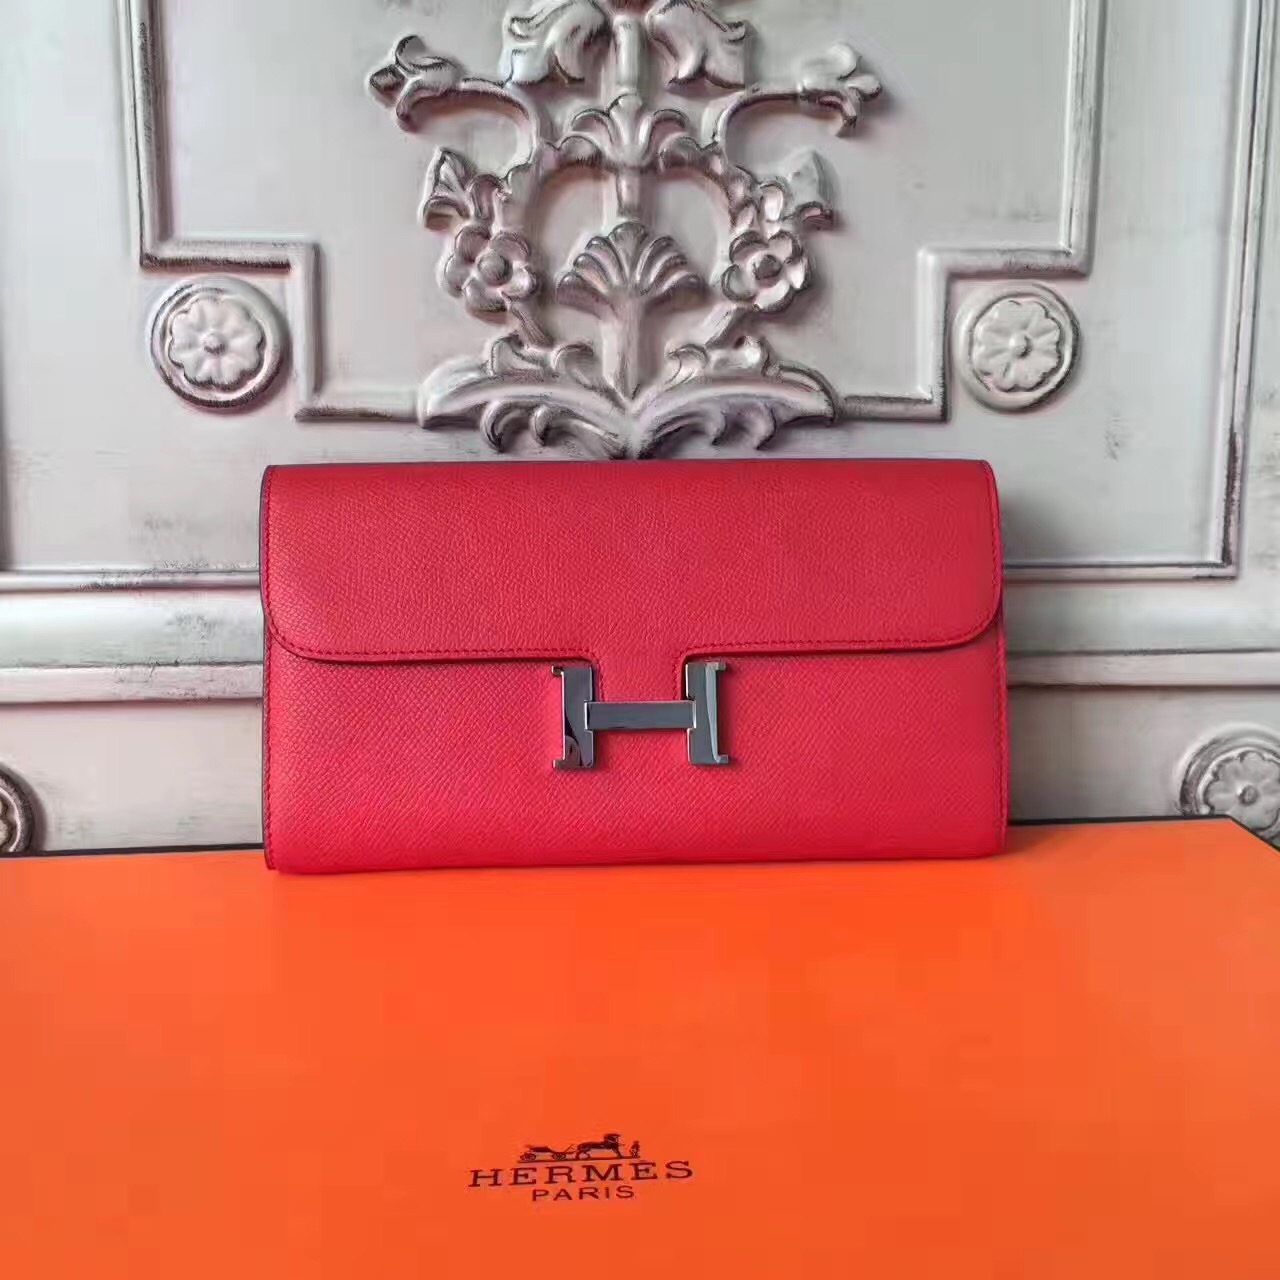 Hermes large Constance leather red top wallet handbags